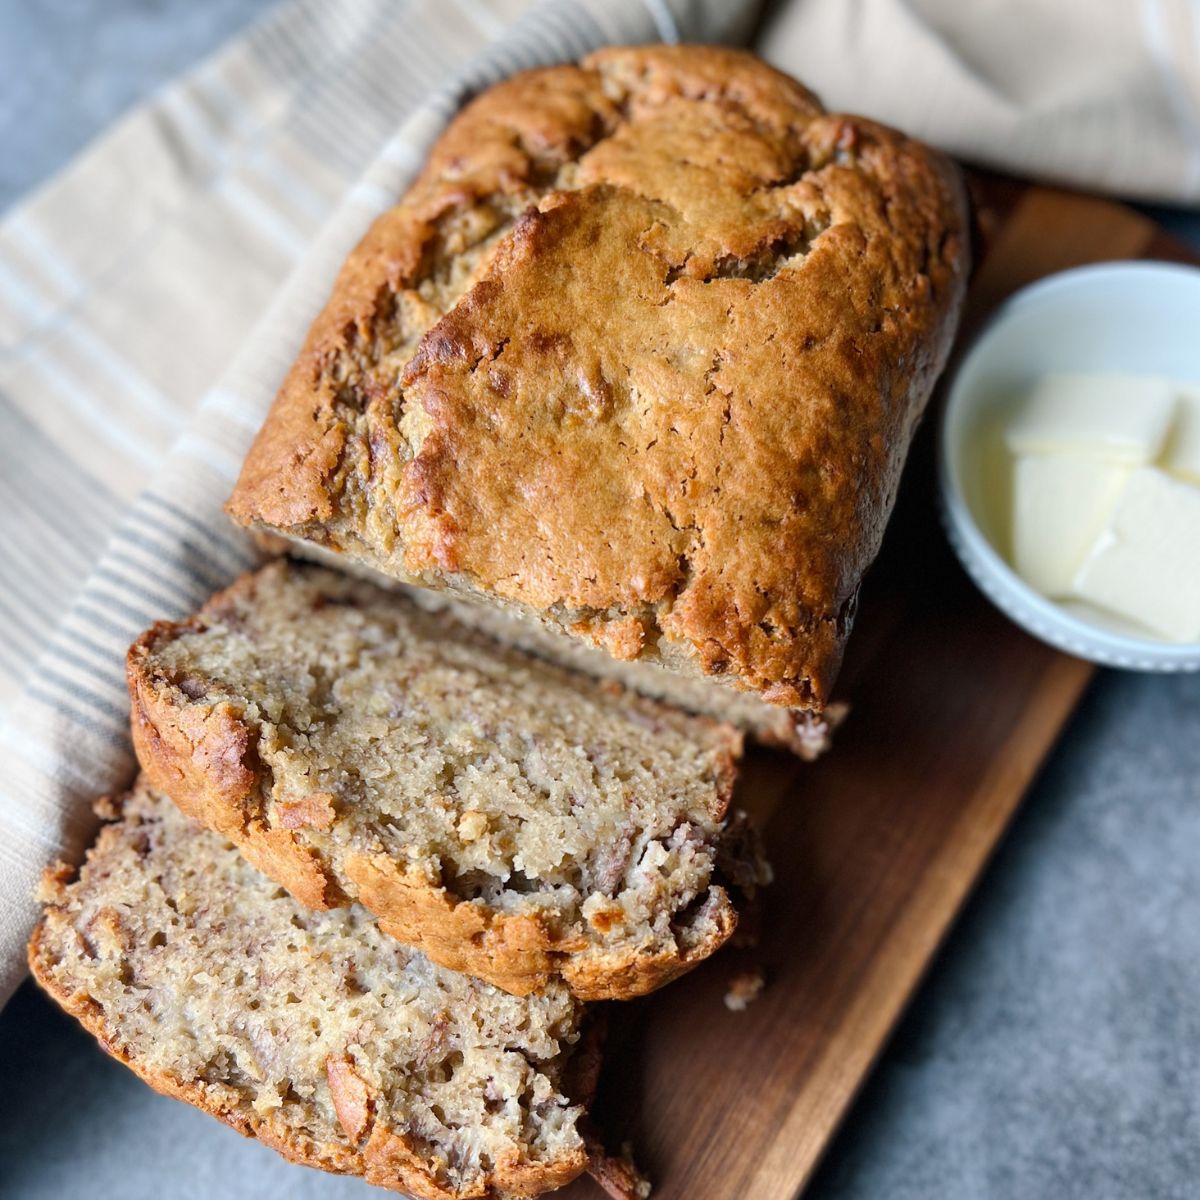 tahini banana bread with two slices cut out. All of it is sitting on a wooden cutting board.